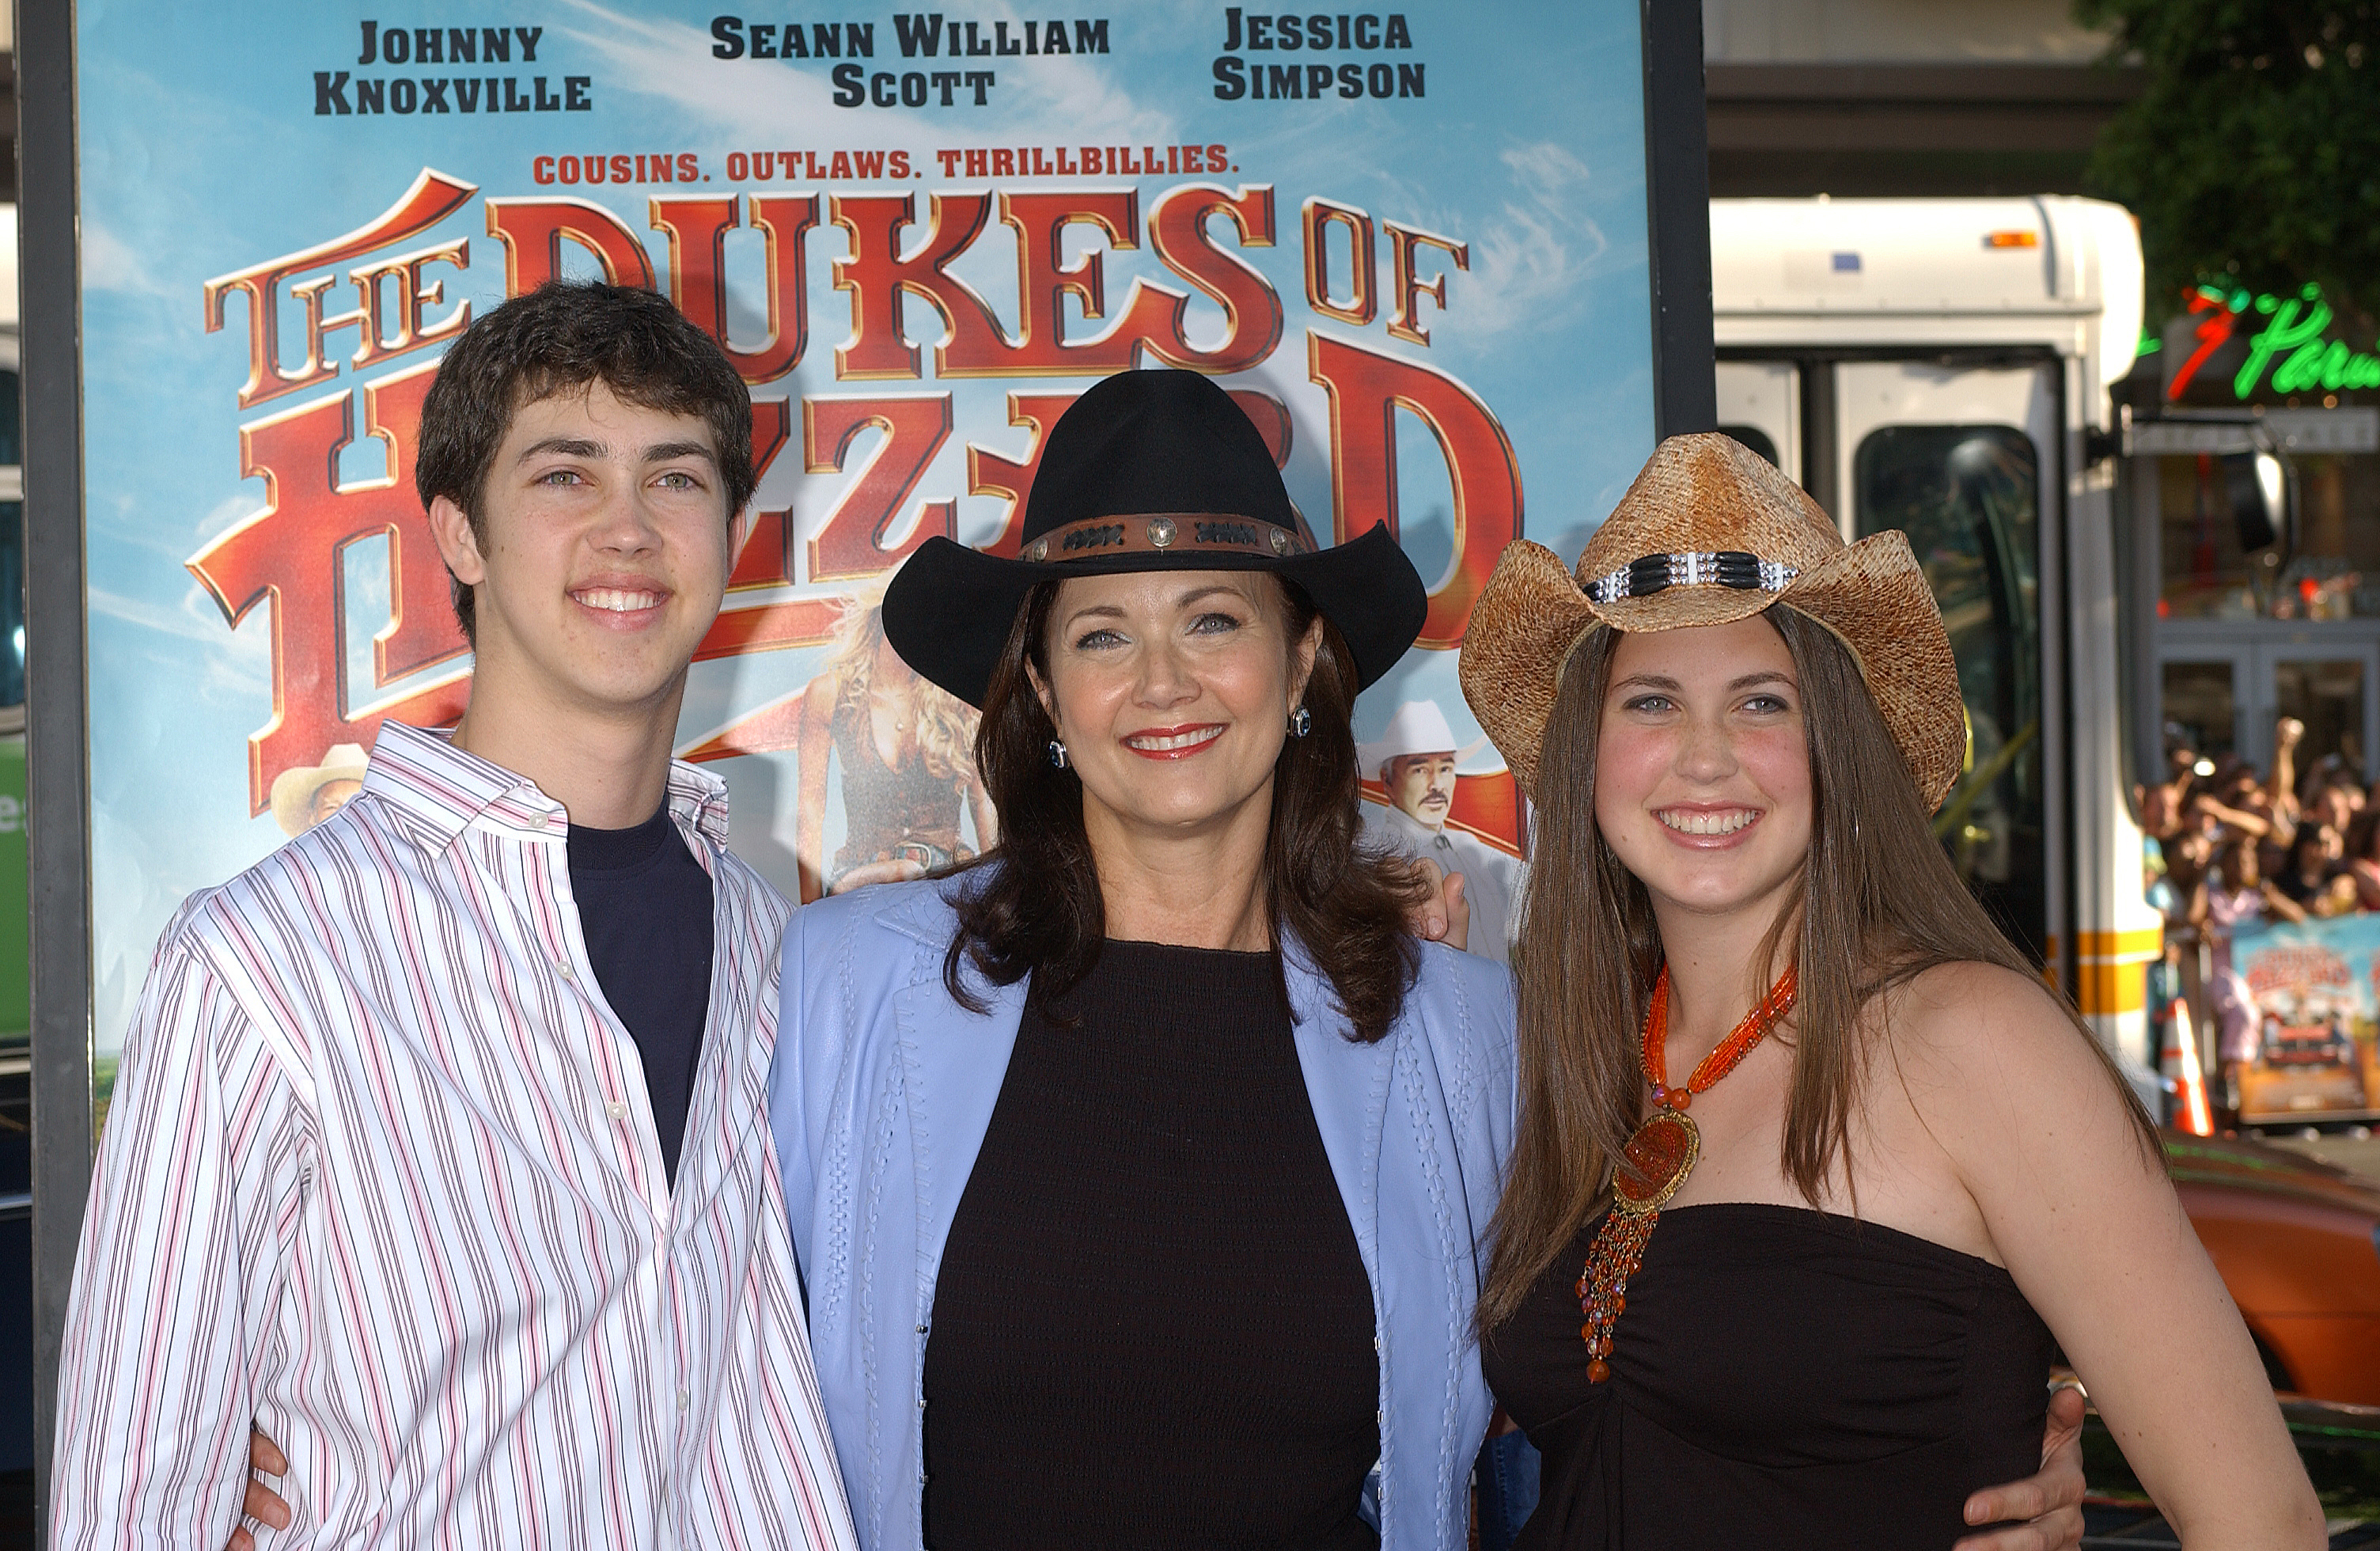 James Altman, Lynda Carter, and Jessica Altman at the premiere of "The Dukes of Hazzard" in Hollywood, California in 2005 | Source: Getty Images